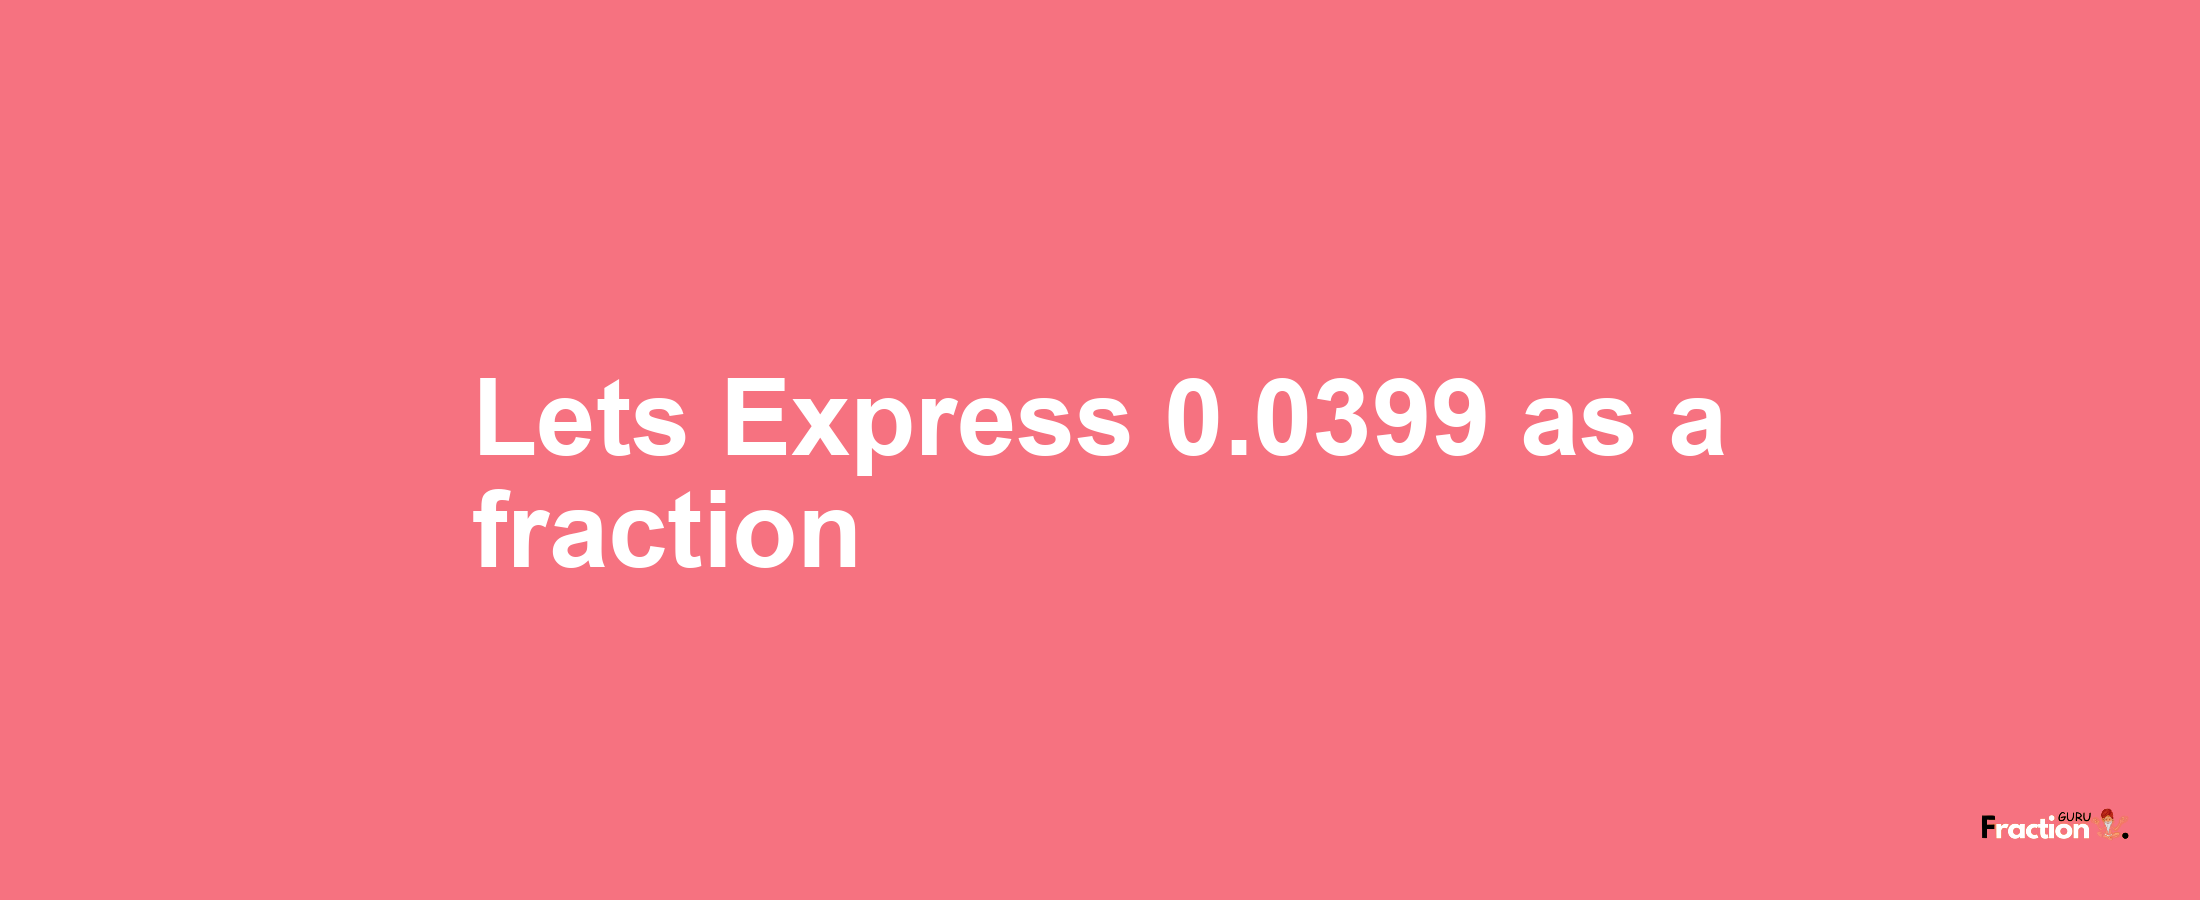 Lets Express 0.0399 as afraction